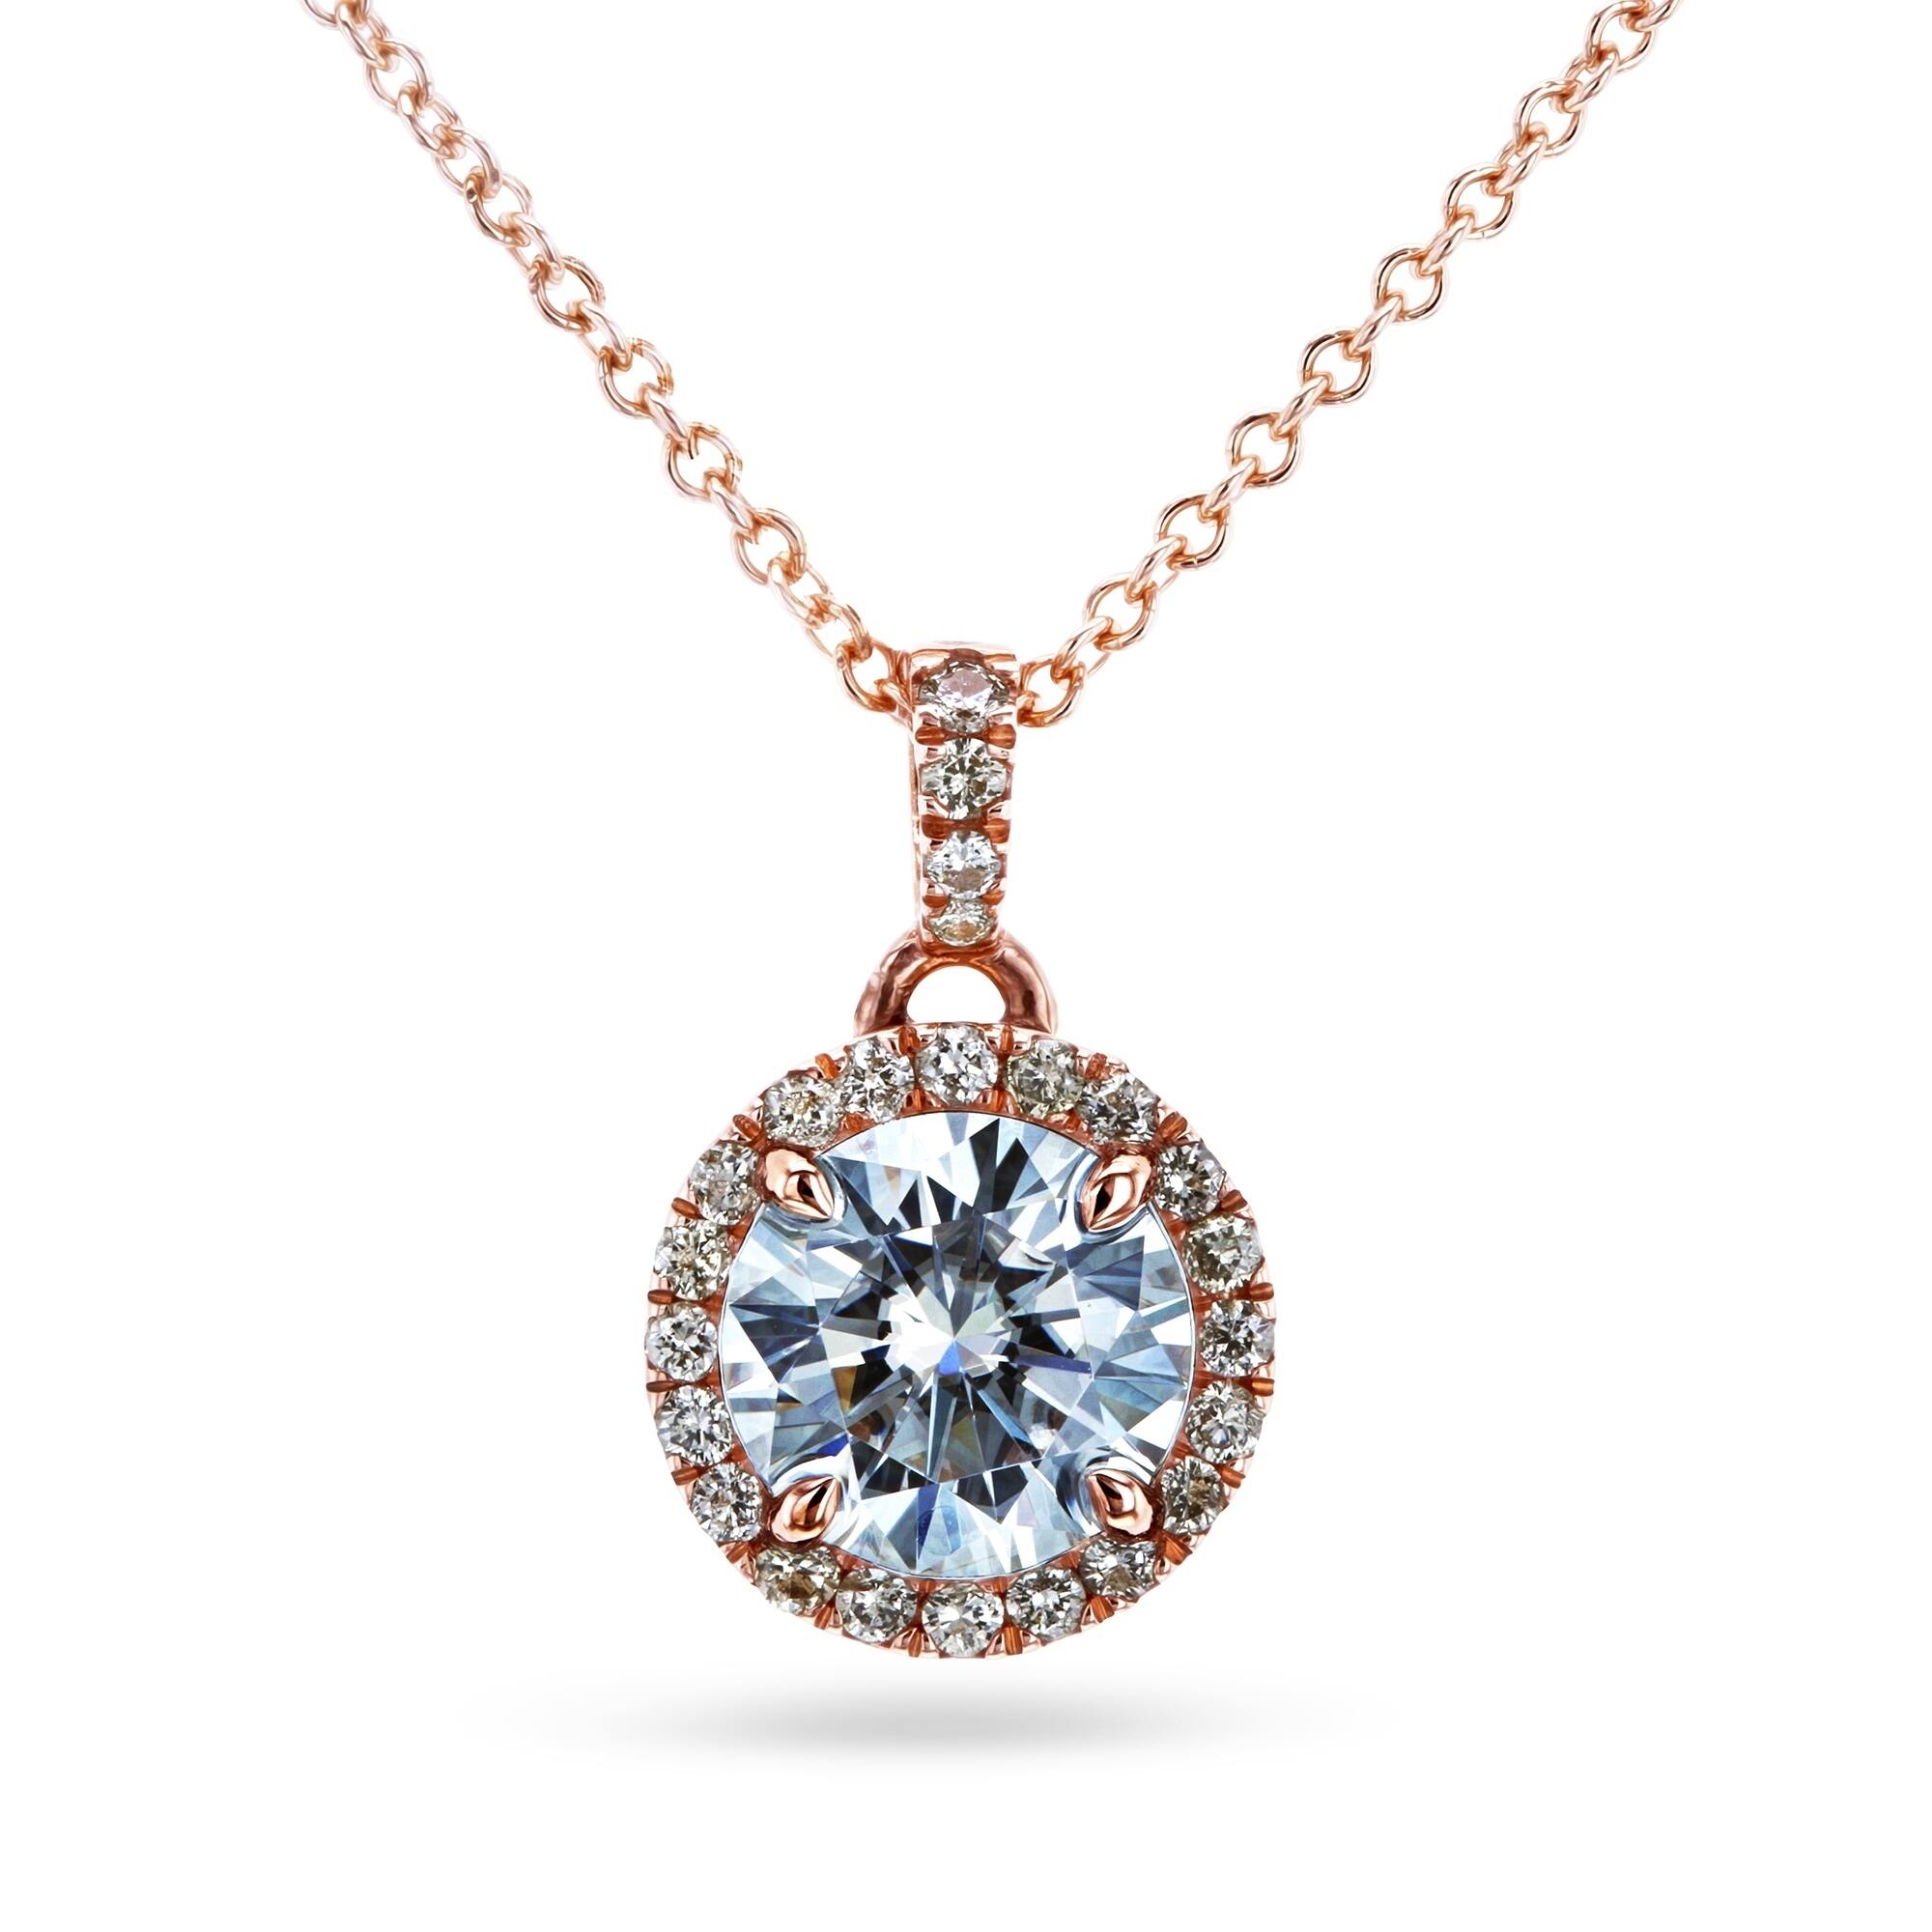 Buy Moissanite Necklaces Online at Overstock | Our Best Necklaces Deals